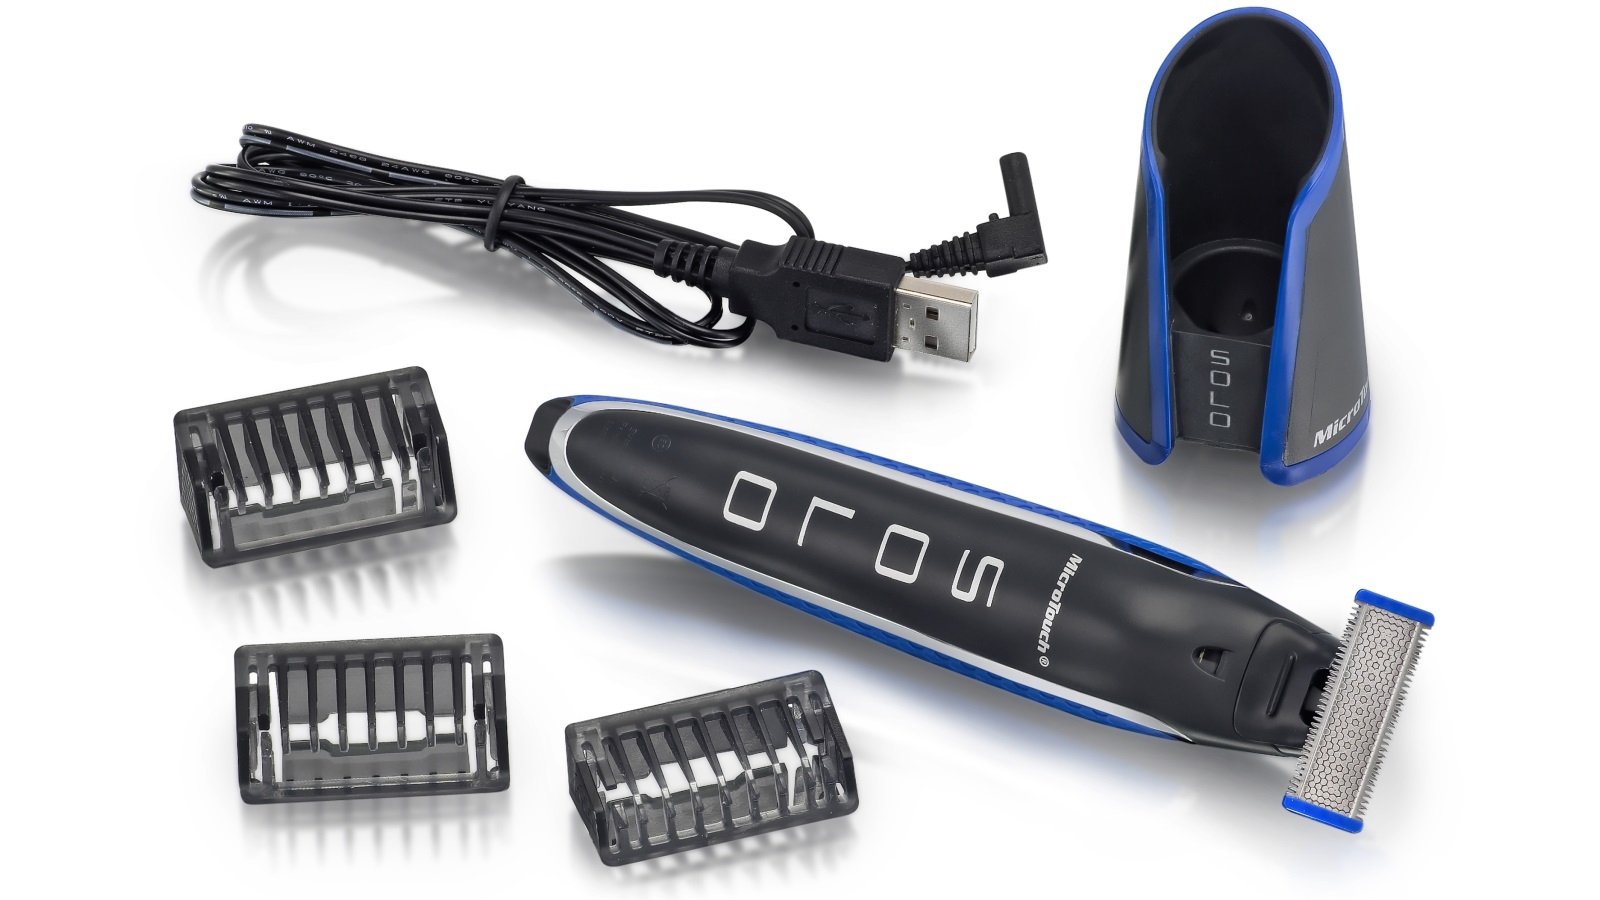 microtouch solo trimmer price